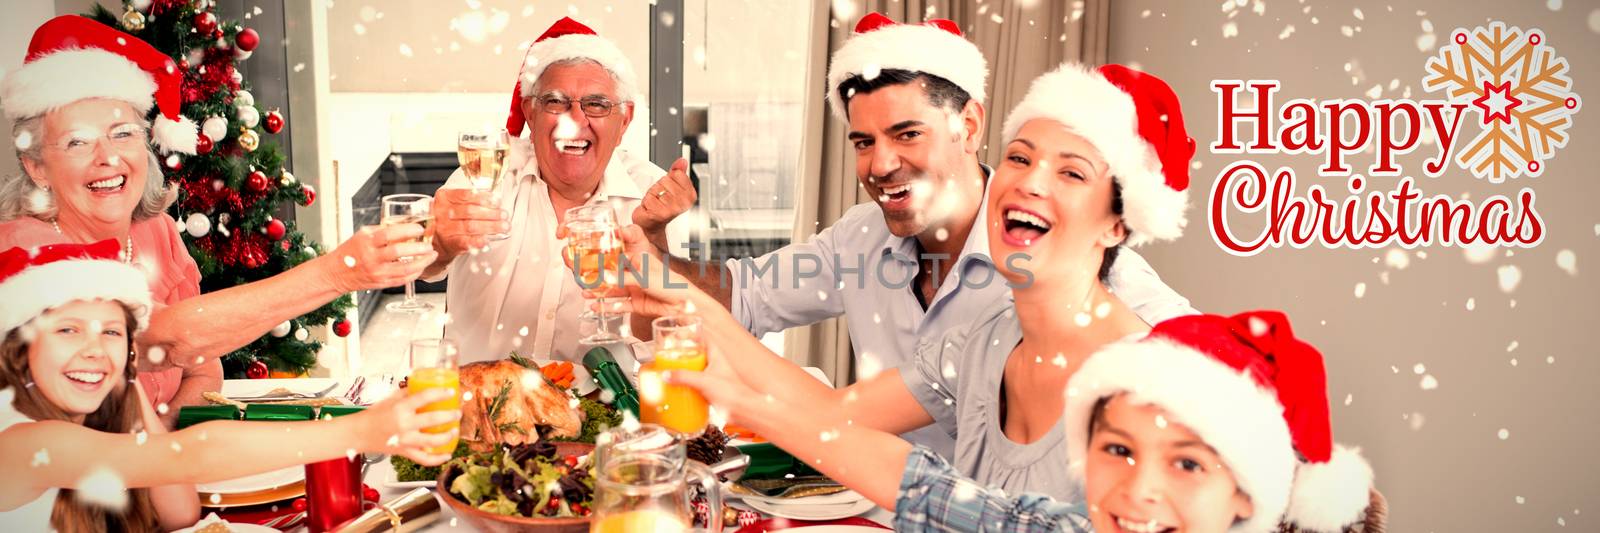 Composite image of family in santas hats toasting wine glasses at dining table by Wavebreakmedia